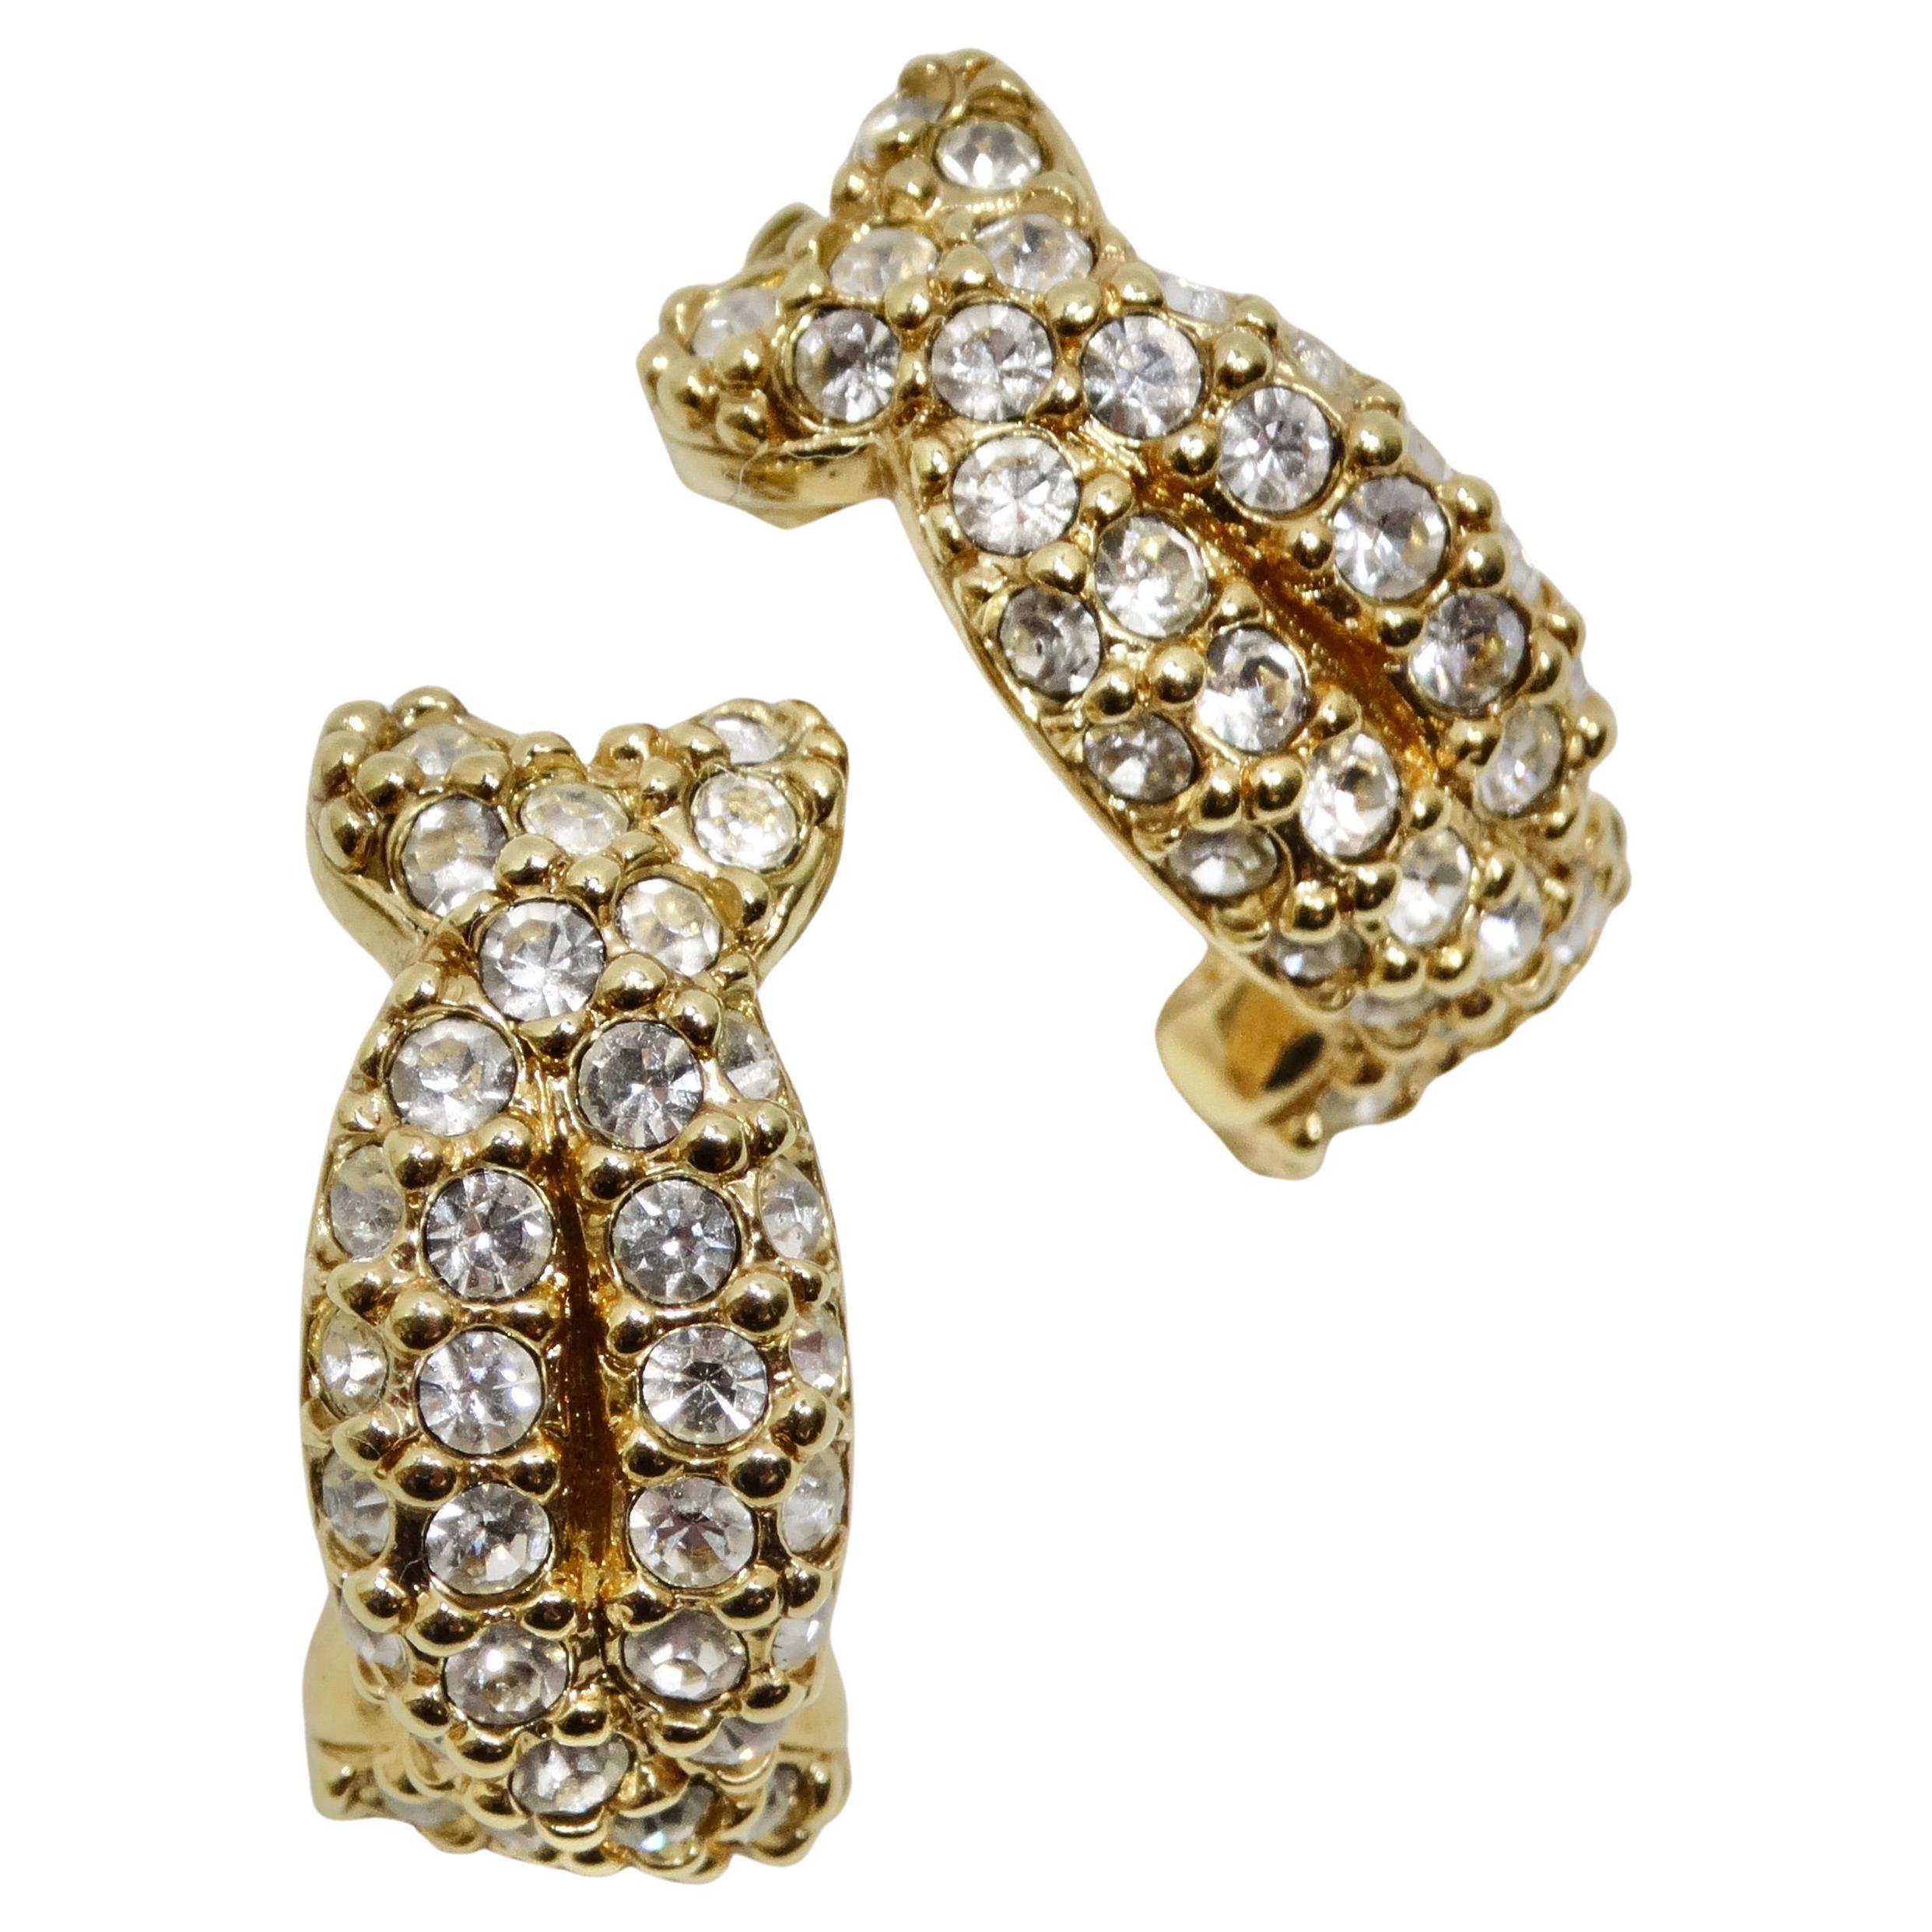 Introducing the Swarovski 18K Gold Plated Rhinestone Huggie Earrings, a classic and glamorous addition to your jewelry collection. These adorable huggie-style earrings from vintage 1990s Swarovski showcase a timeless design, featuring round clear